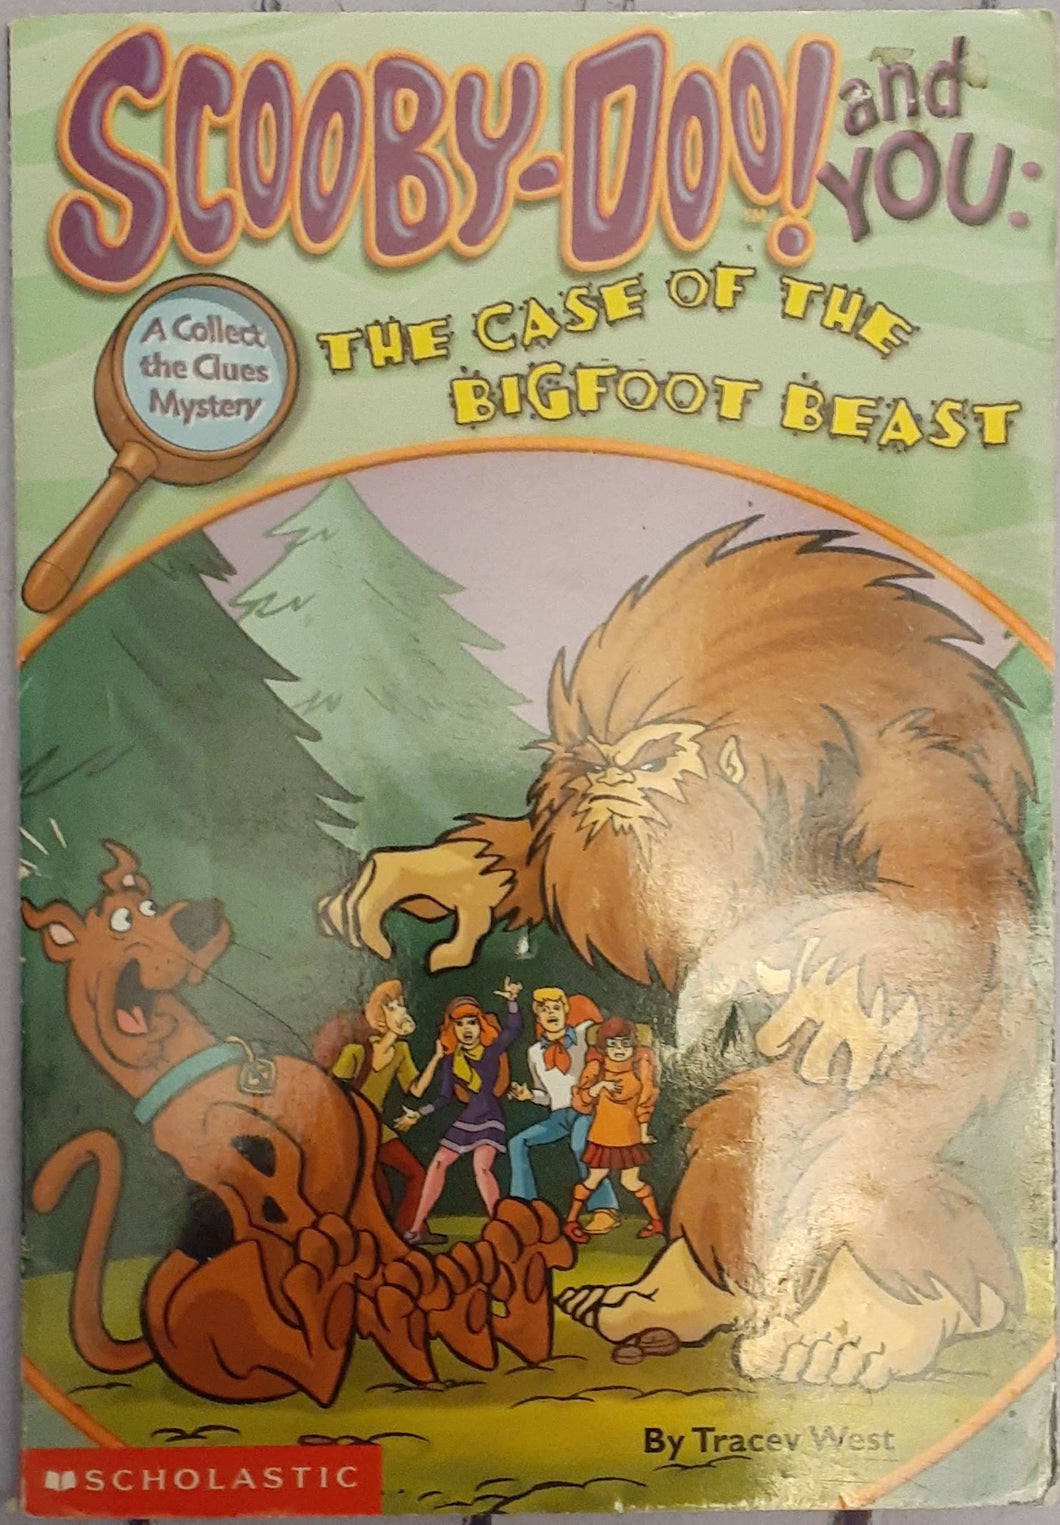 Scooby-Doo! and You The Case of the Bigfoot Beast